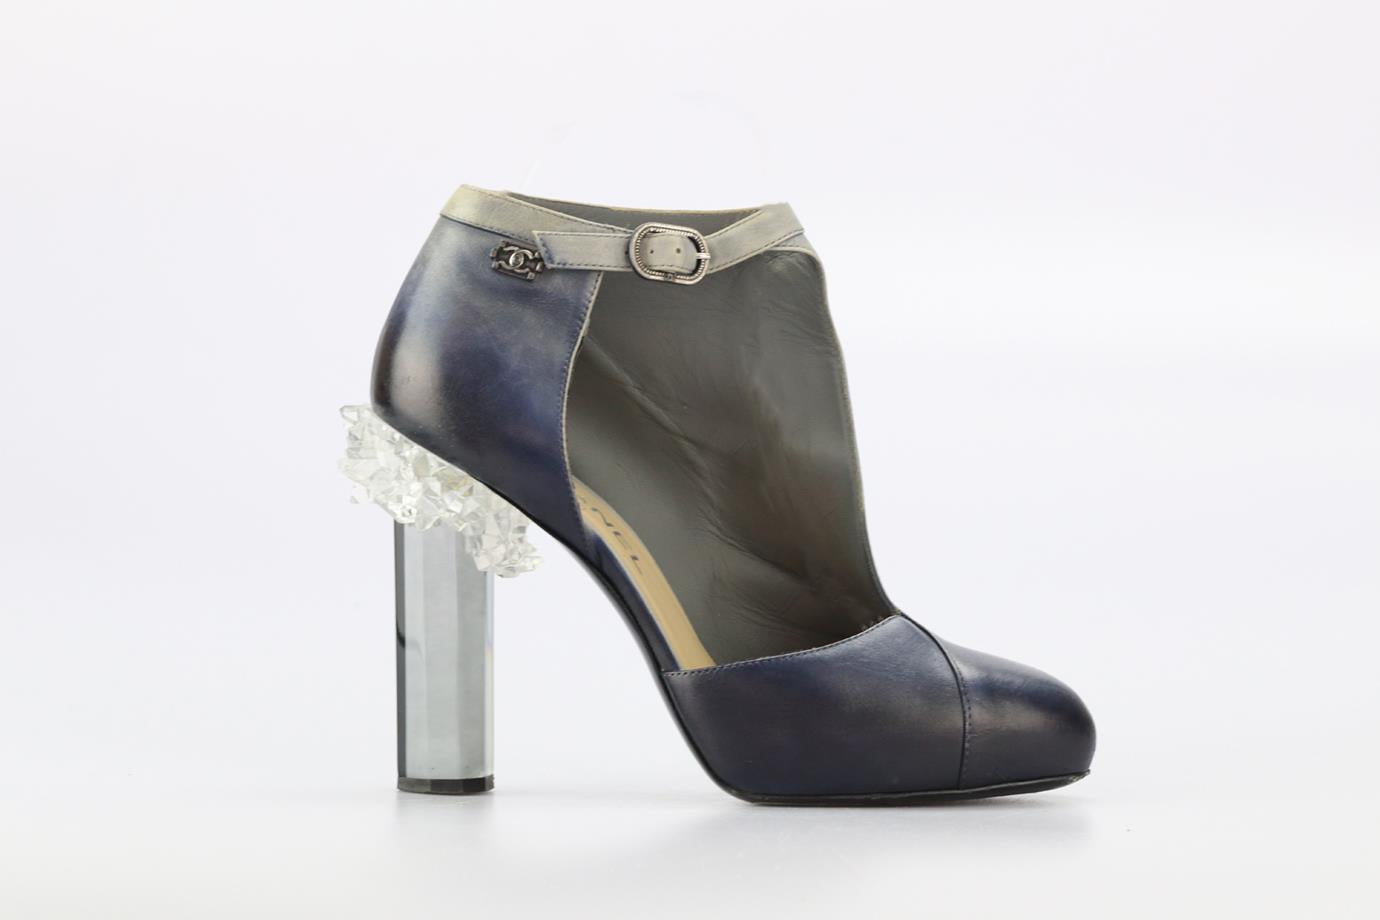 CHANEL 2012 LEATHER ANKLE BOOTS EU 38.5 UK 5.5 US 8.5